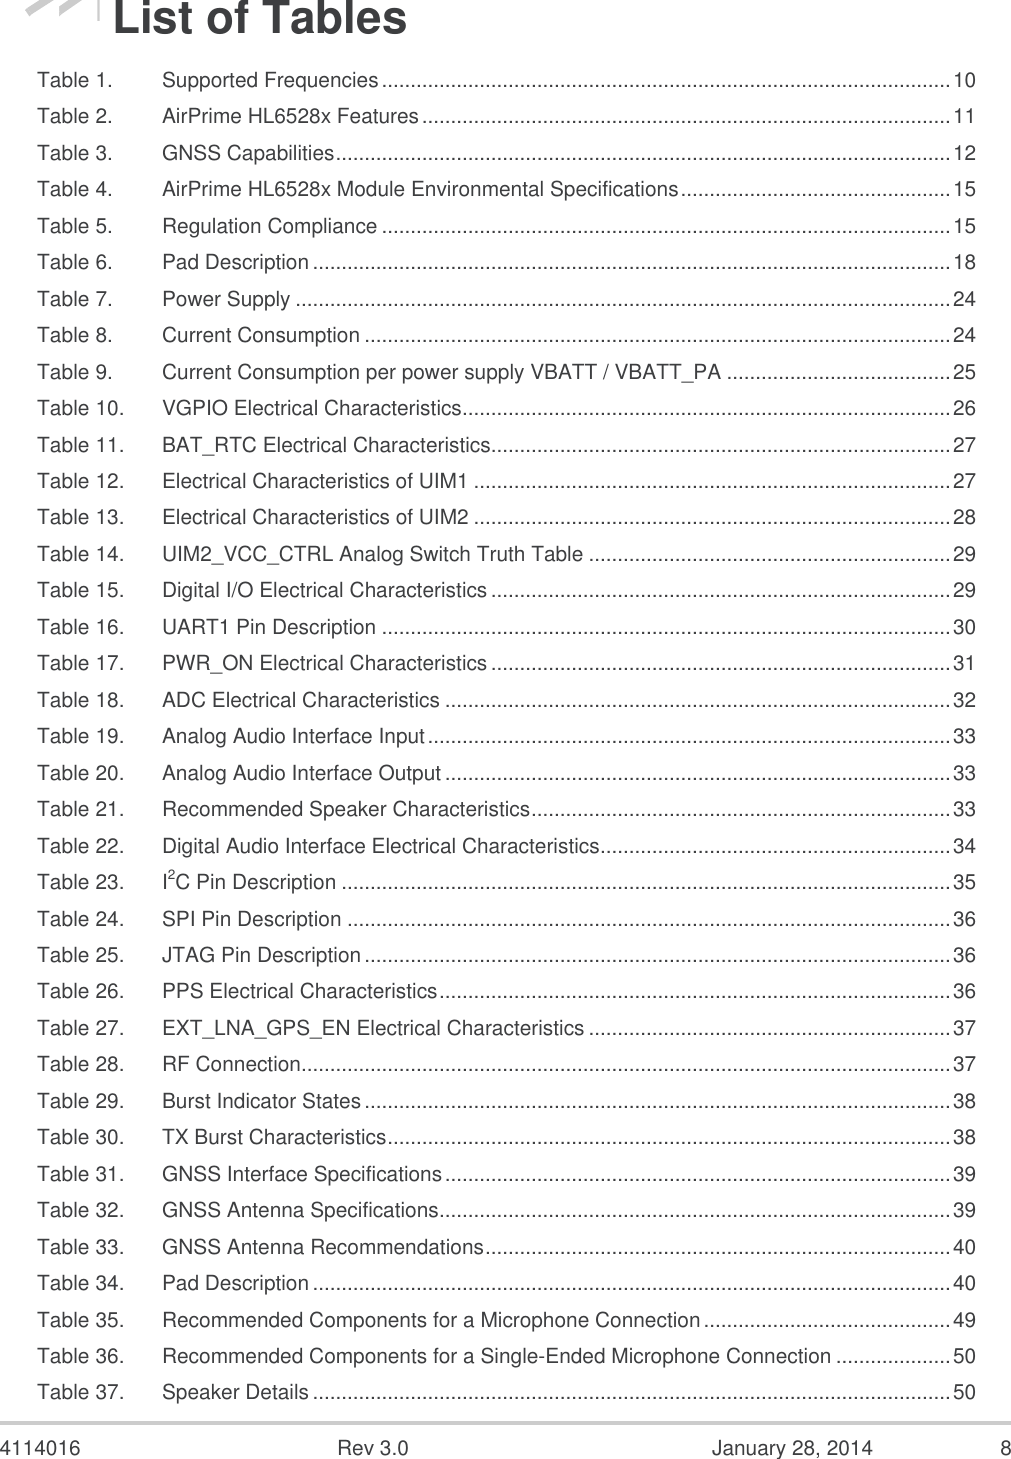  4114016  Rev 3.0  January 28, 2014  8 List of Tables Table 1. Supported Frequencies ................................................................................................... 10 Table 2. AirPrime HL6528x Features ............................................................................................ 11 Table 3. GNSS Capabilities ........................................................................................................... 12 Table 4. AirPrime HL6528x Module Environmental Specifications ............................................... 15 Table 5. Regulation Compliance ................................................................................................... 15 Table 6. Pad Description ............................................................................................................... 18 Table 7. Power Supply .................................................................................................................. 24 Table 8. Current Consumption ...................................................................................................... 24 Table 9. Current Consumption per power supply VBATT / VBATT_PA ....................................... 25 Table 10. VGPIO Electrical Characteristics ..................................................................................... 26 Table 11. BAT_RTC Electrical Characteristics................................................................................ 27 Table 12. Electrical Characteristics of UIM1 ................................................................................... 27 Table 13. Electrical Characteristics of UIM2 ................................................................................... 28 Table 14. UIM2_VCC_CTRL Analog Switch Truth Table ............................................................... 29 Table 15. Digital I/O Electrical Characteristics ................................................................................ 29 Table 16. UART1 Pin Description ................................................................................................... 30 Table 17. PWR_ON Electrical Characteristics ................................................................................ 31 Table 18. ADC Electrical Characteristics ........................................................................................ 32 Table 19. Analog Audio Interface Input ........................................................................................... 33 Table 20. Analog Audio Interface Output ........................................................................................ 33 Table 21. Recommended Speaker Characteristics ......................................................................... 33 Table 22. Digital Audio Interface Electrical Characteristics ............................................................. 34 Table 23. I2C Pin Description .......................................................................................................... 35 Table 24. SPI Pin Description ......................................................................................................... 36 Table 25. JTAG Pin Description ...................................................................................................... 36 Table 26. PPS Electrical Characteristics ......................................................................................... 36 Table 27. EXT_LNA_GPS_EN Electrical Characteristics ............................................................... 37 Table 28. RF Connection................................................................................................................. 37 Table 29. Burst Indicator States ...................................................................................................... 38 Table 30. TX Burst Characteristics .................................................................................................. 38 Table 31. GNSS Interface Specifications ........................................................................................ 39 Table 32. GNSS Antenna Specifications ......................................................................................... 39 Table 33. GNSS Antenna Recommendations ................................................................................. 40 Table 34. Pad Description ............................................................................................................... 40 Table 35. Recommended Components for a Microphone Connection ........................................... 49 Table 36. Recommended Components for a Single-Ended Microphone Connection .................... 50 Table 37. Speaker Details ............................................................................................................... 50 